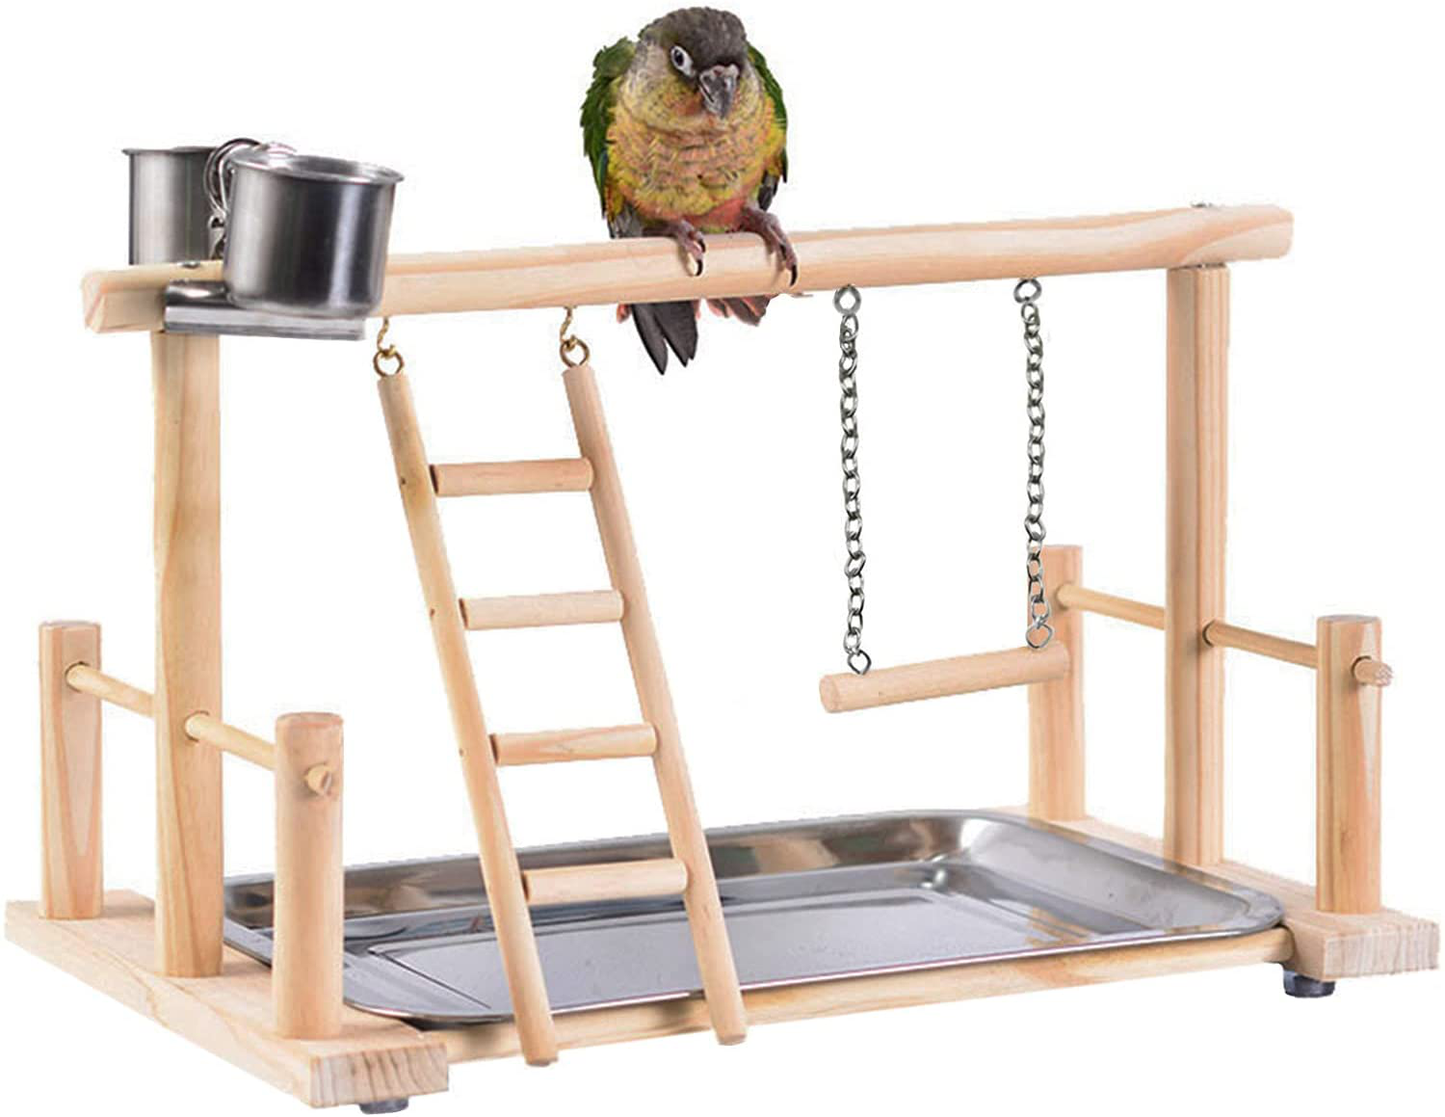 Hamiledyi Bird Playground,Parrot Play Stand Parakeet Activity Center Gym Training Stand with 2 Feeder Cups Ladder Swing Toys for Cockatiels Lovebirds Parakeets Parrots Conures Animals & Pet Supplies > Pet Supplies > Bird Supplies > Bird Gyms & Playstands Hamiledyi   